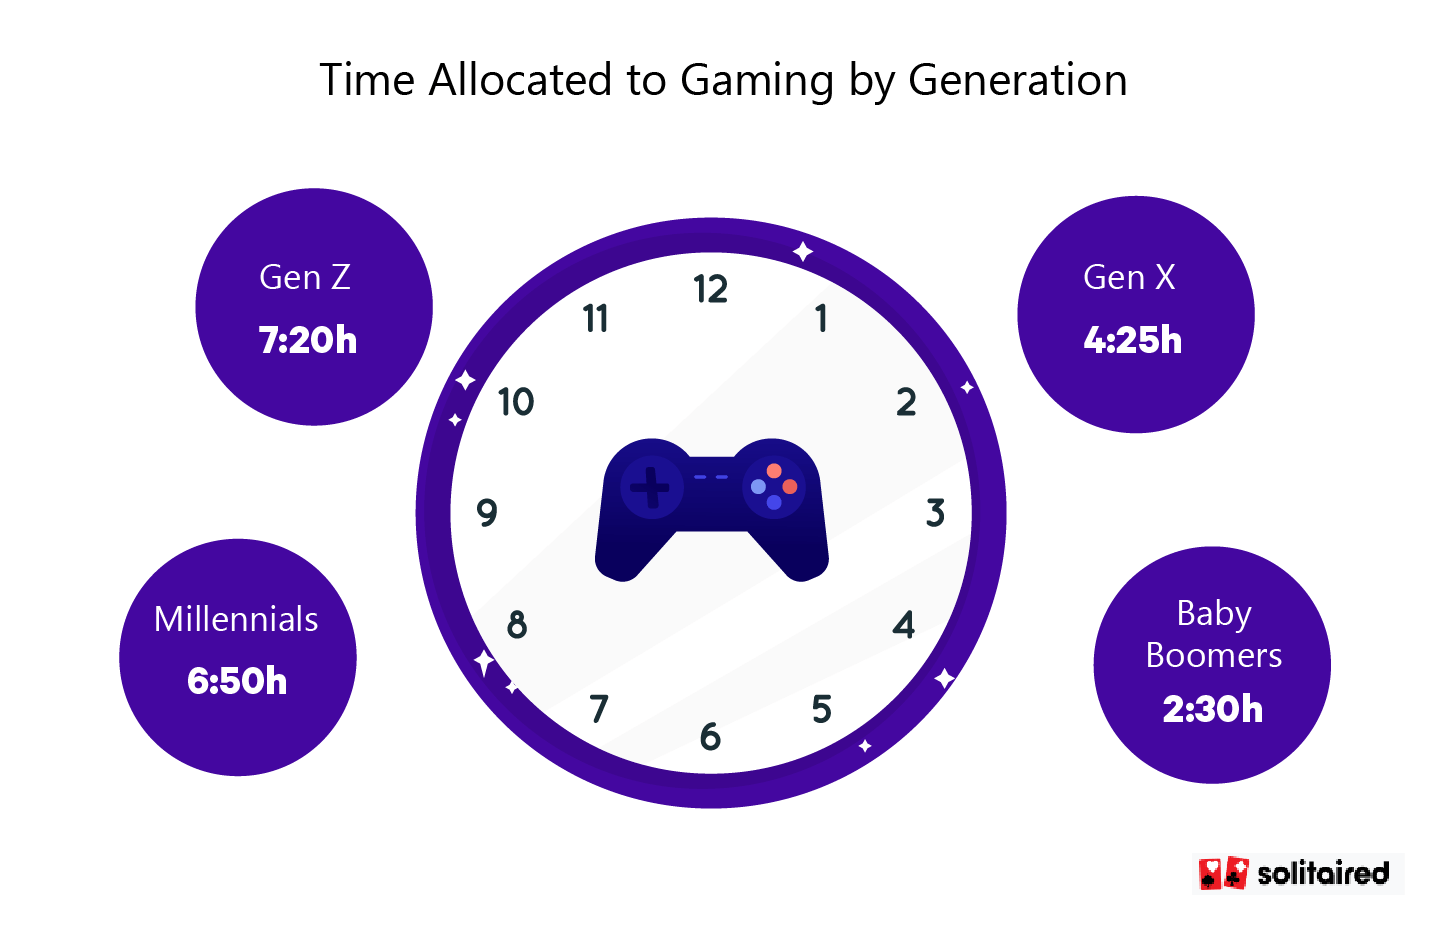 Time allocated to gaming by generation